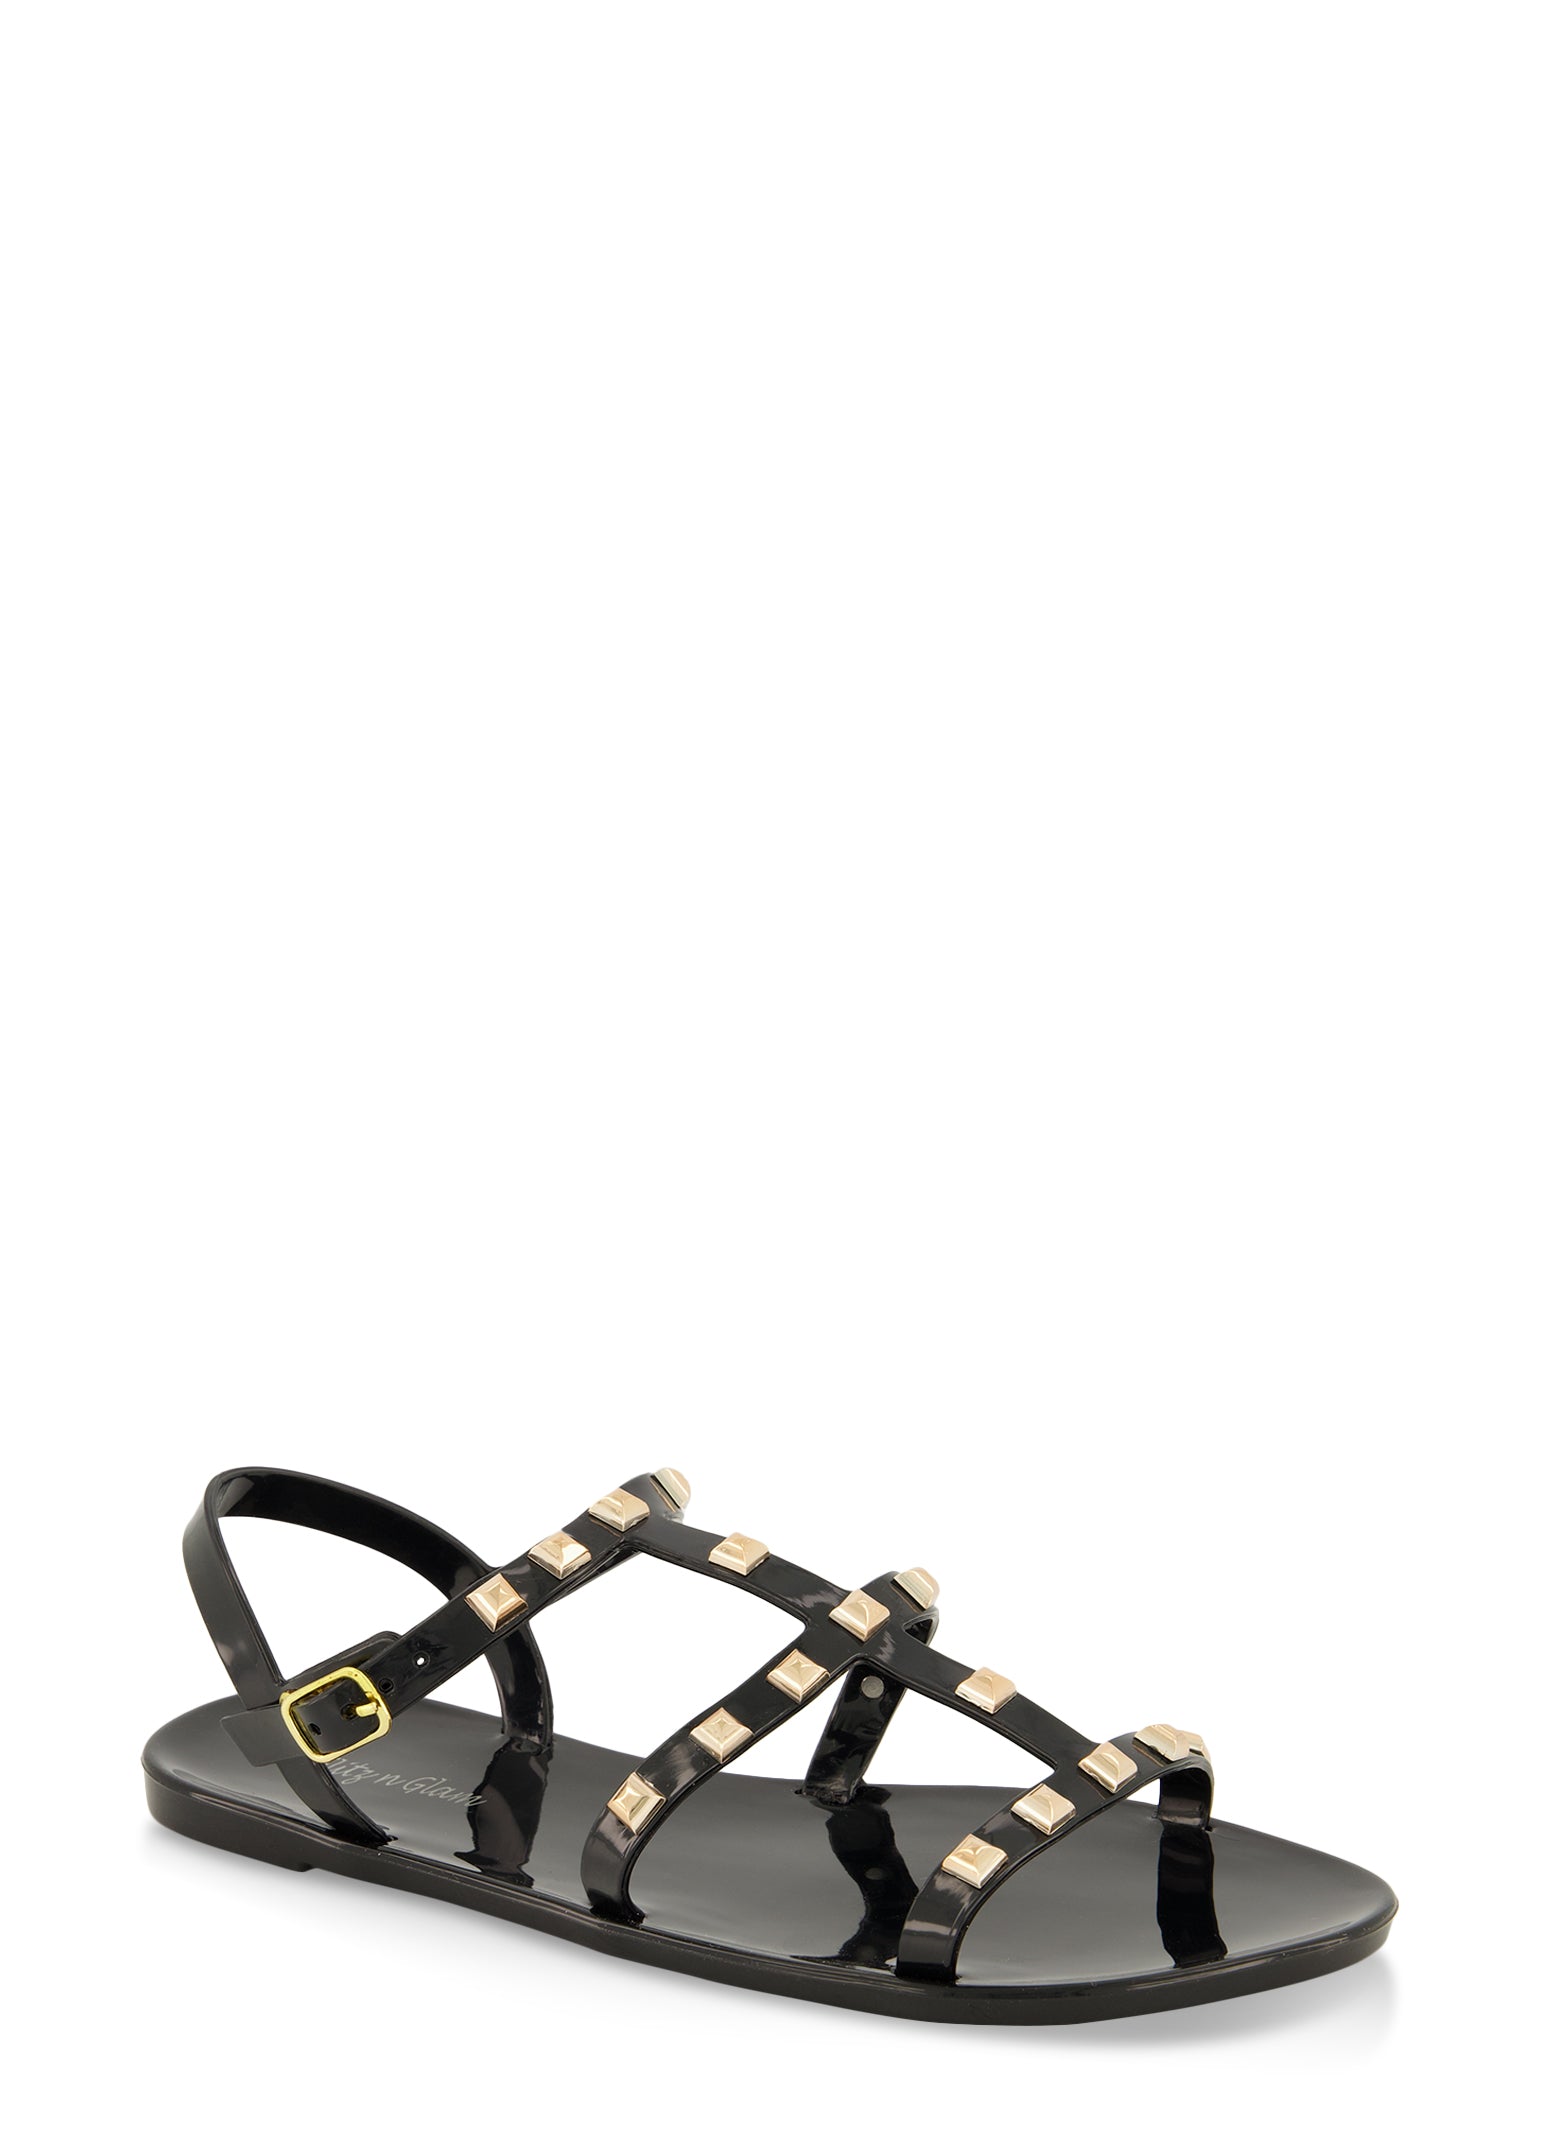 Womens Girls Studded Jelly Sandals, Black, Size 11